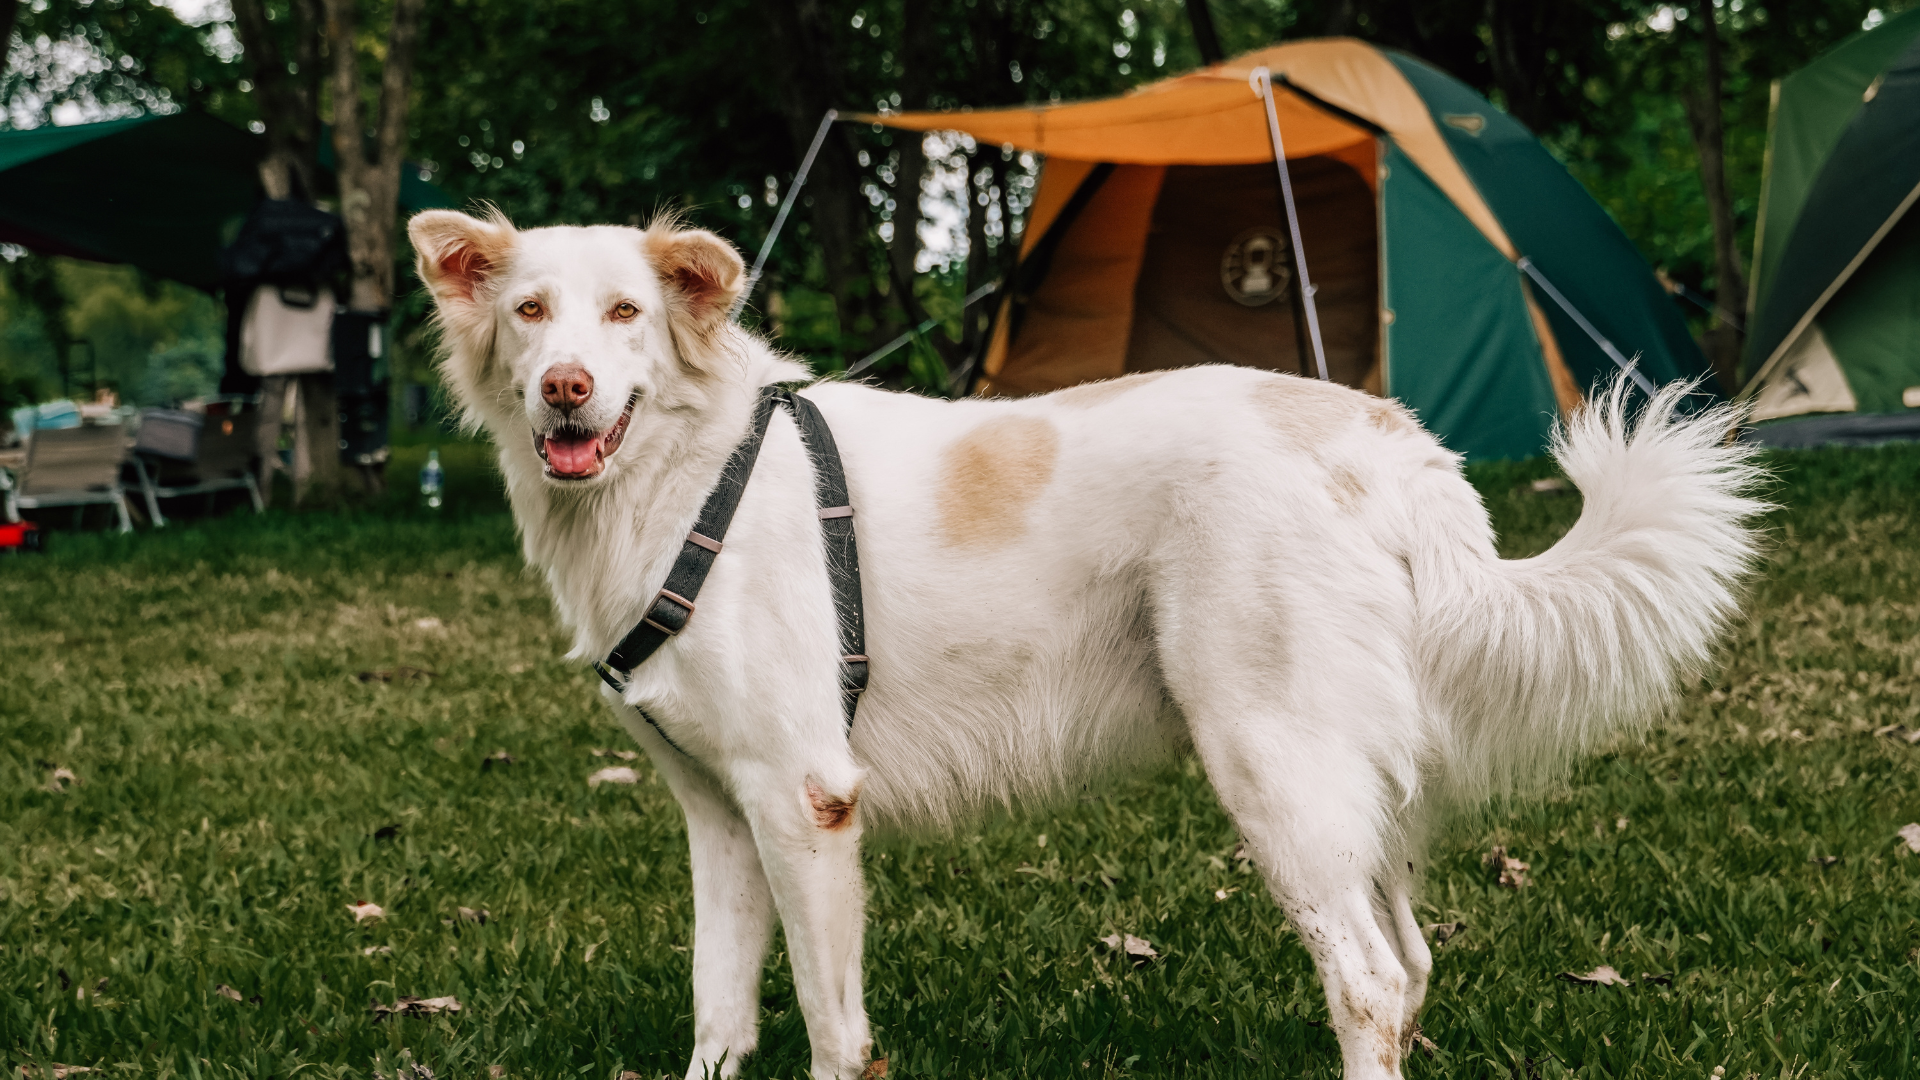 Tips for Camping With Dogs in the Wilderness